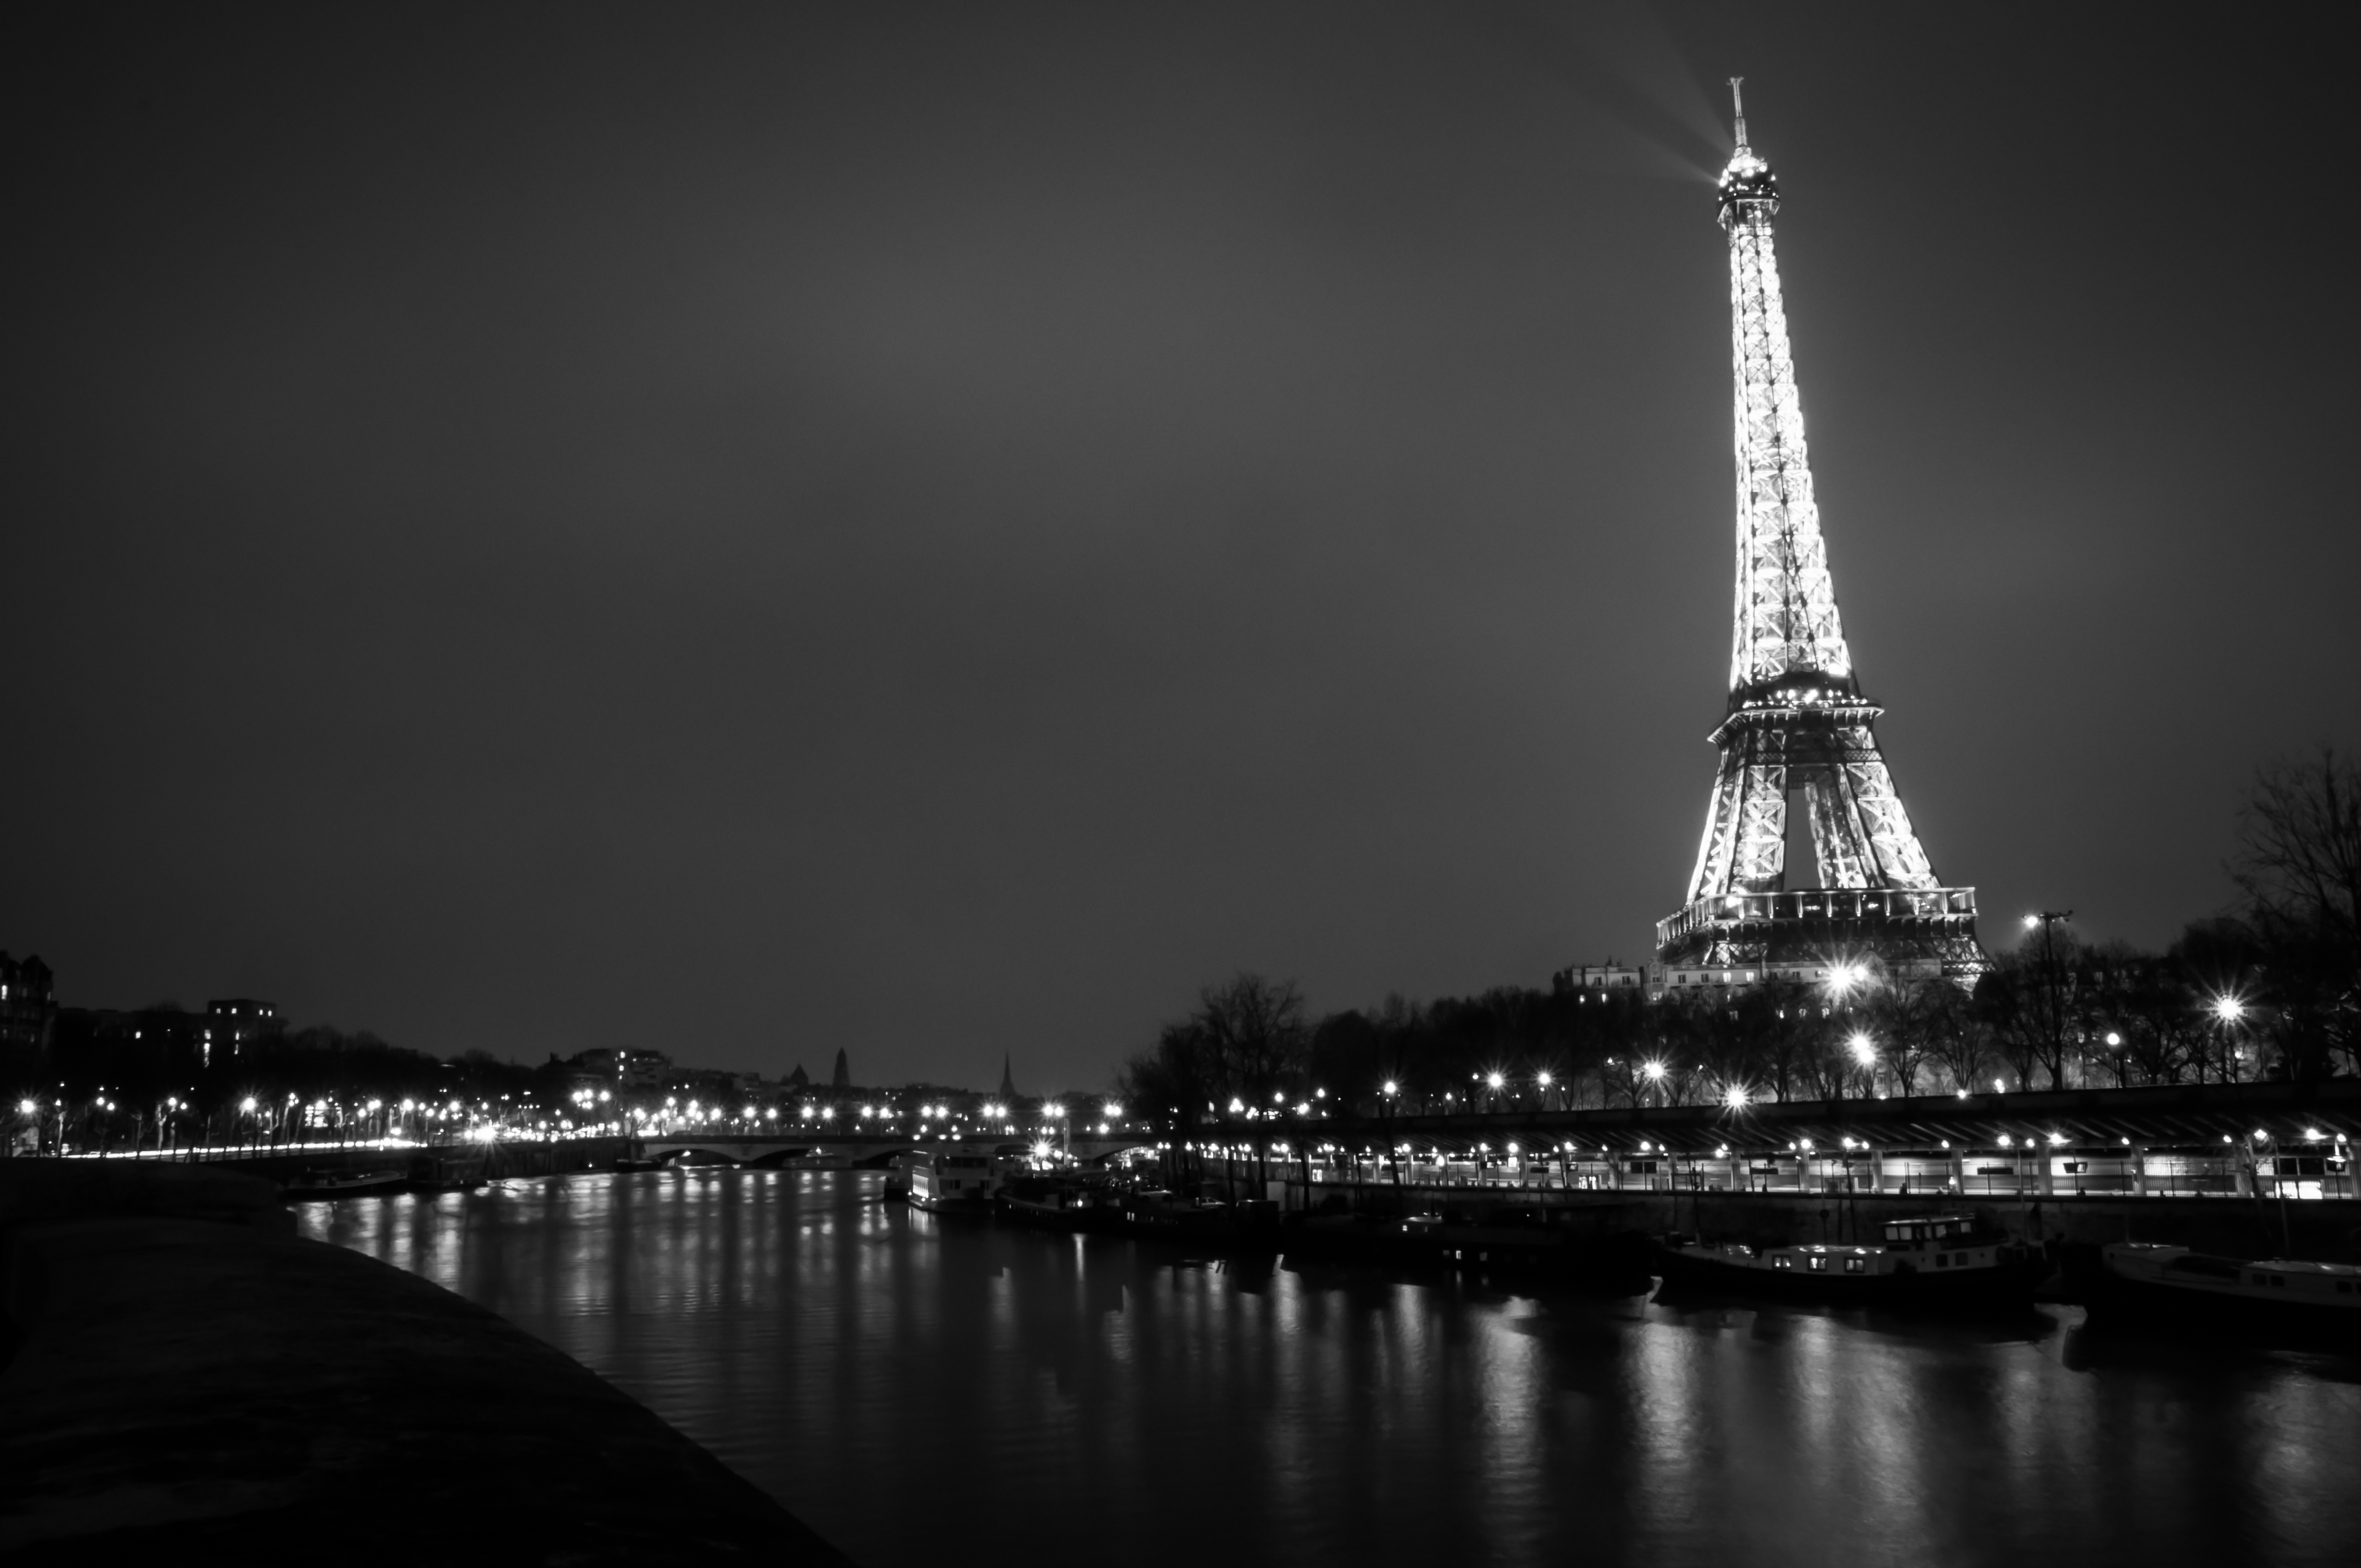 green screen background images free download paris background